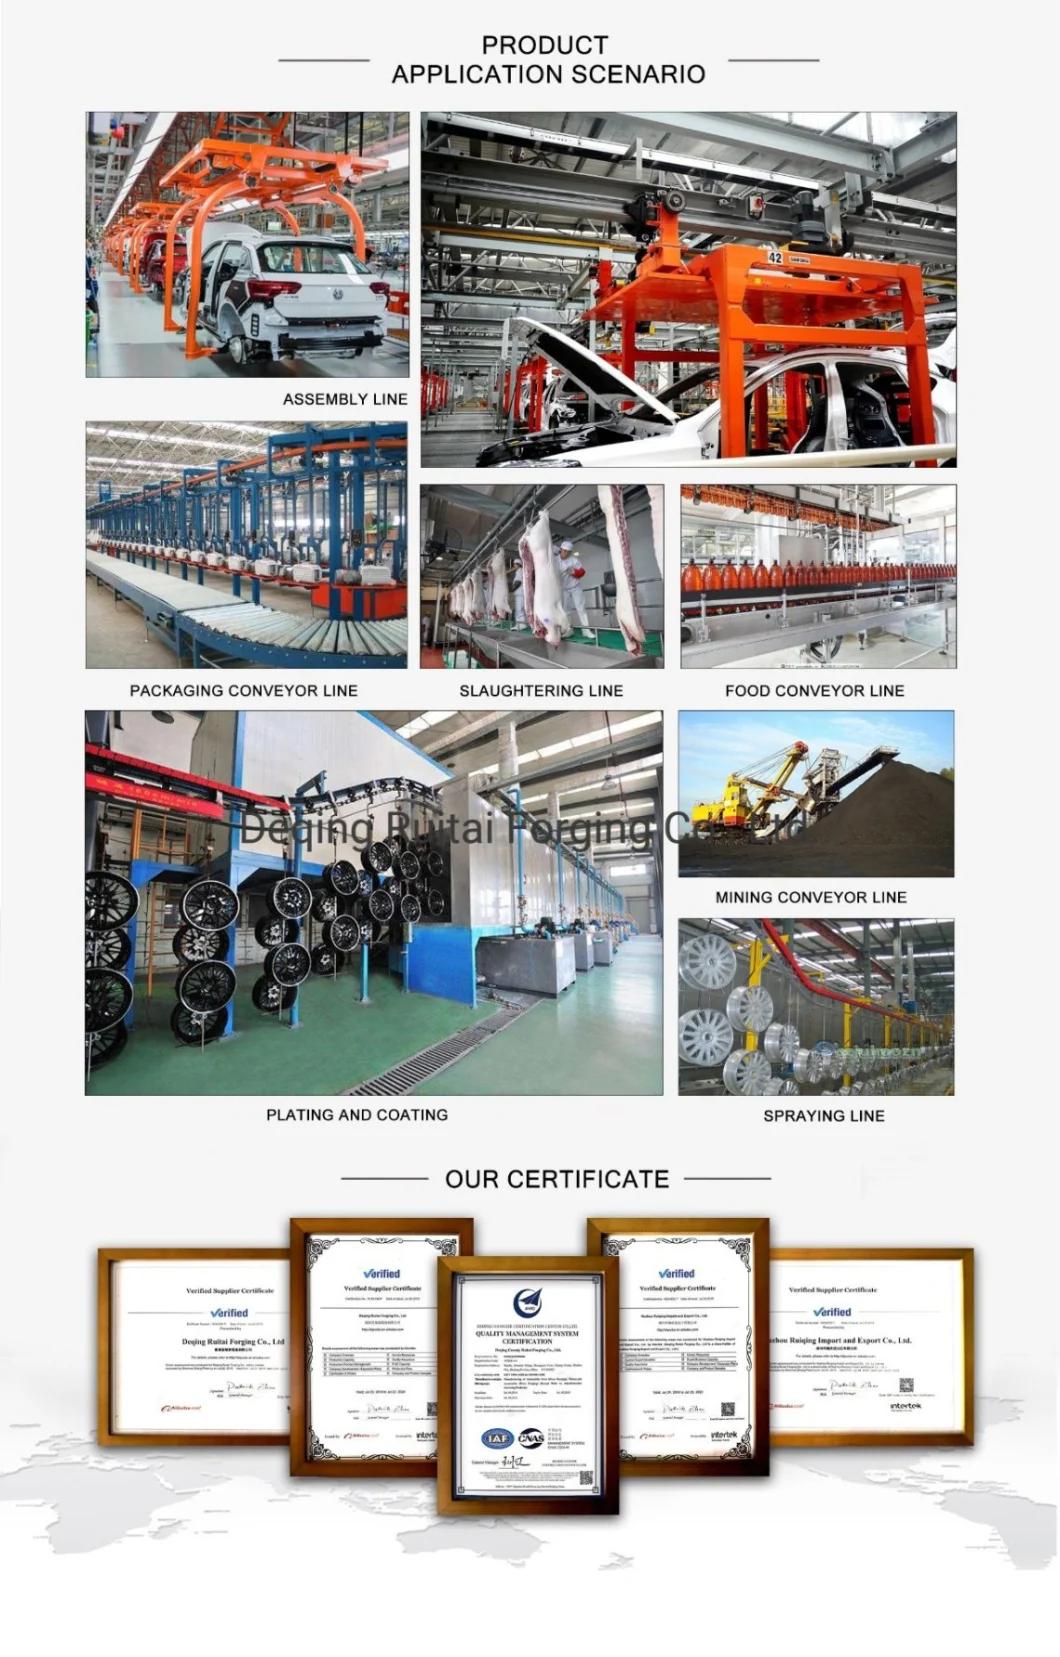 China Factory of Drop Forged High Duty Overhead Monorail I Beam Conveyor Bracket Chain Trolley Pulley with Roller Bearing for Poultry Slaughtering X348 X458